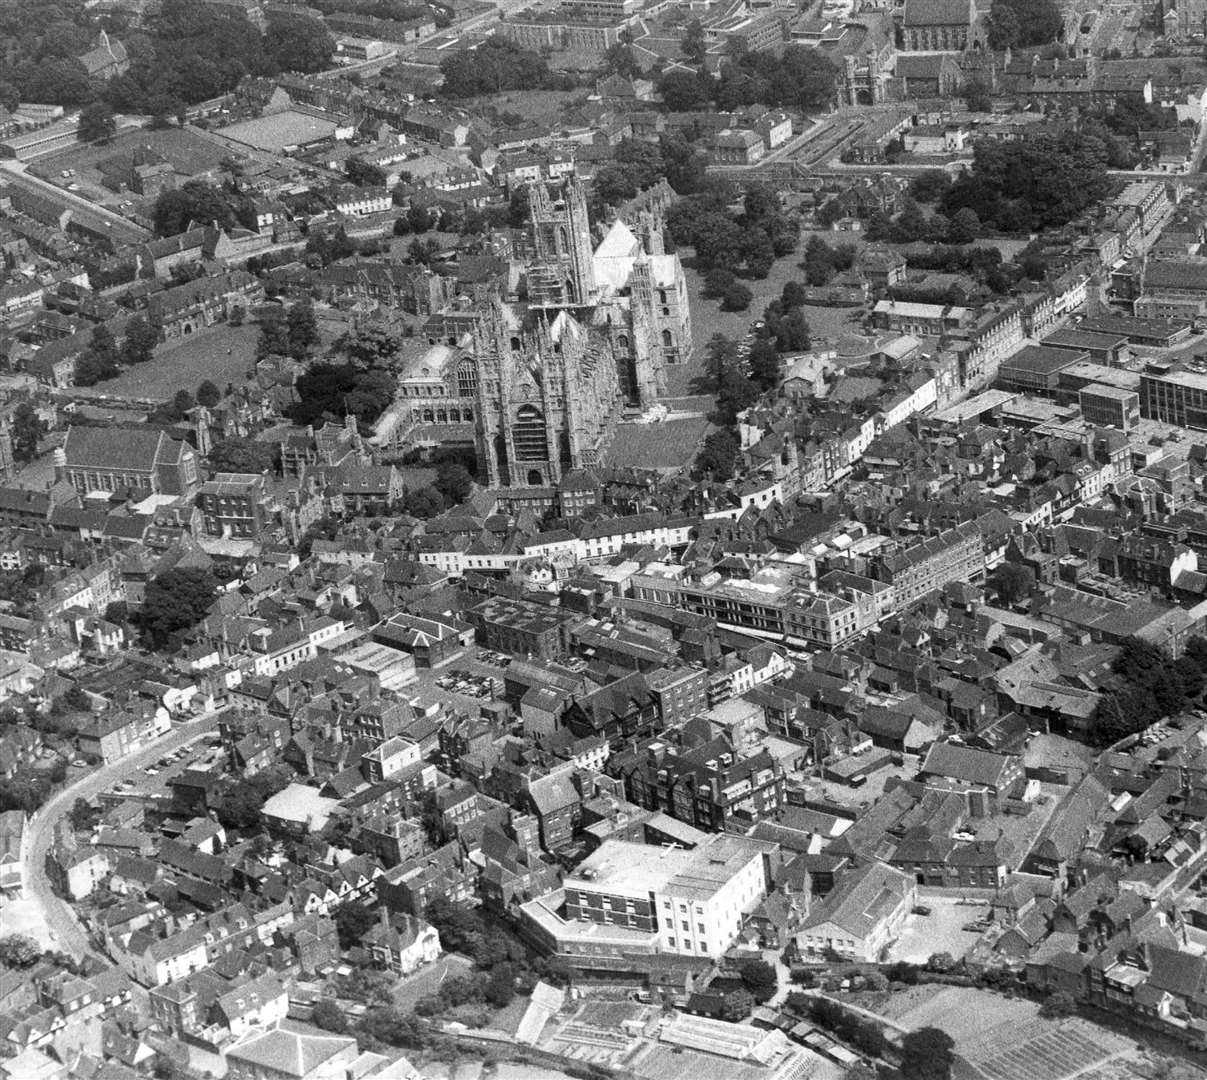 Just as Canterbury Cathedral does today, here it is dominating an aerial view of the city centre in 1971